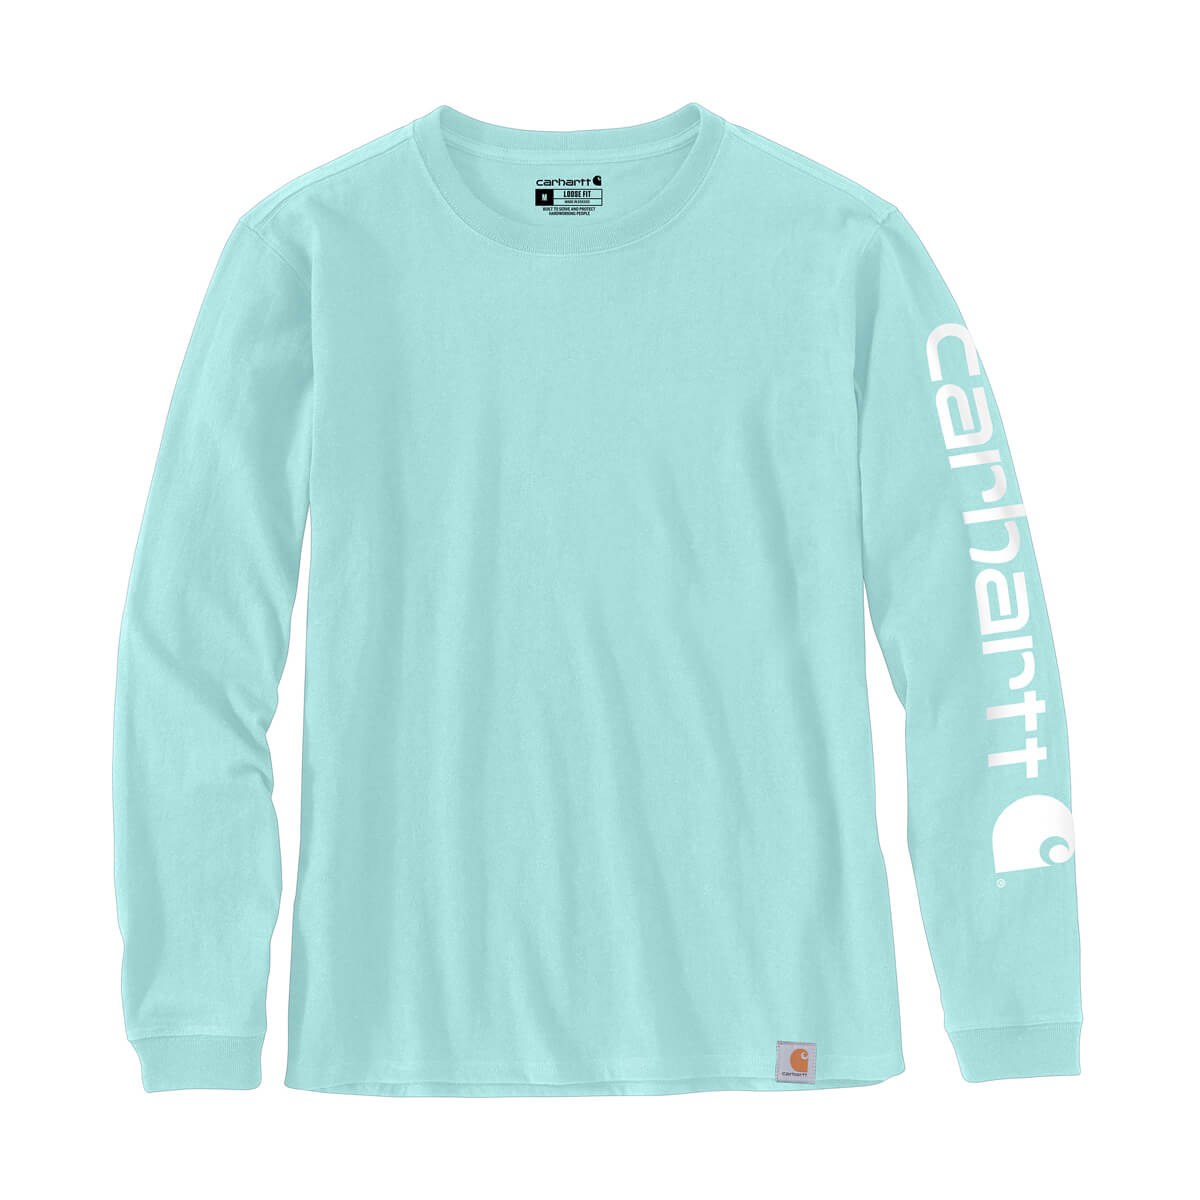 Carhartt Women's Loose Fit Heavyweight Long-Sleeve Logo Sleeve Graphic T-Shirt - Pastel Turquoise